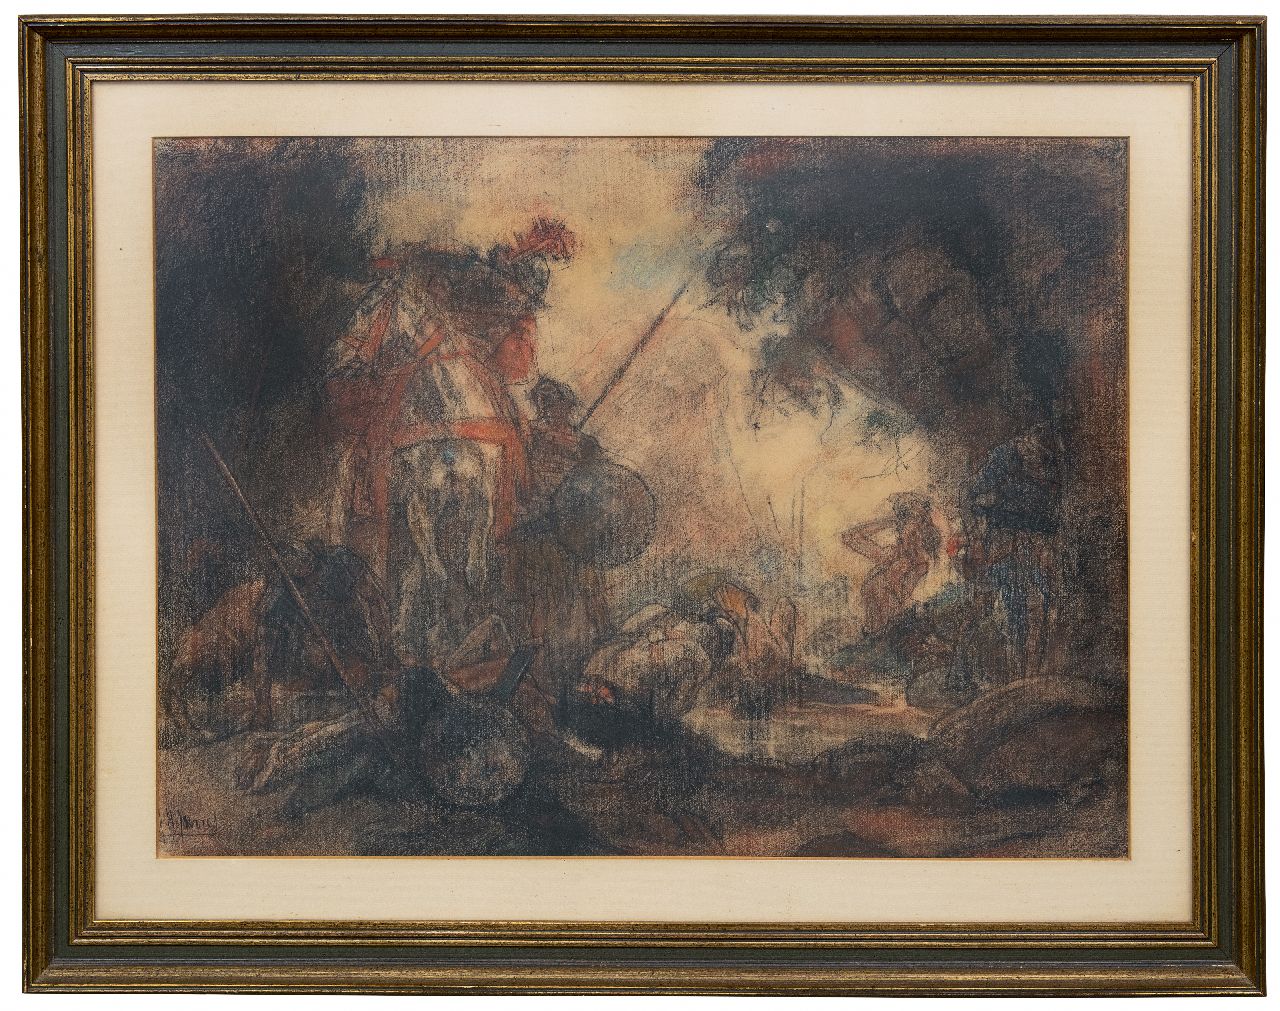 Jurres J.H.  | Johannes Hendricus Jurres | Watercolours and drawings offered for sale | After the battle, pastel on paper 54.2 x 73.2 cm, signed l.l.